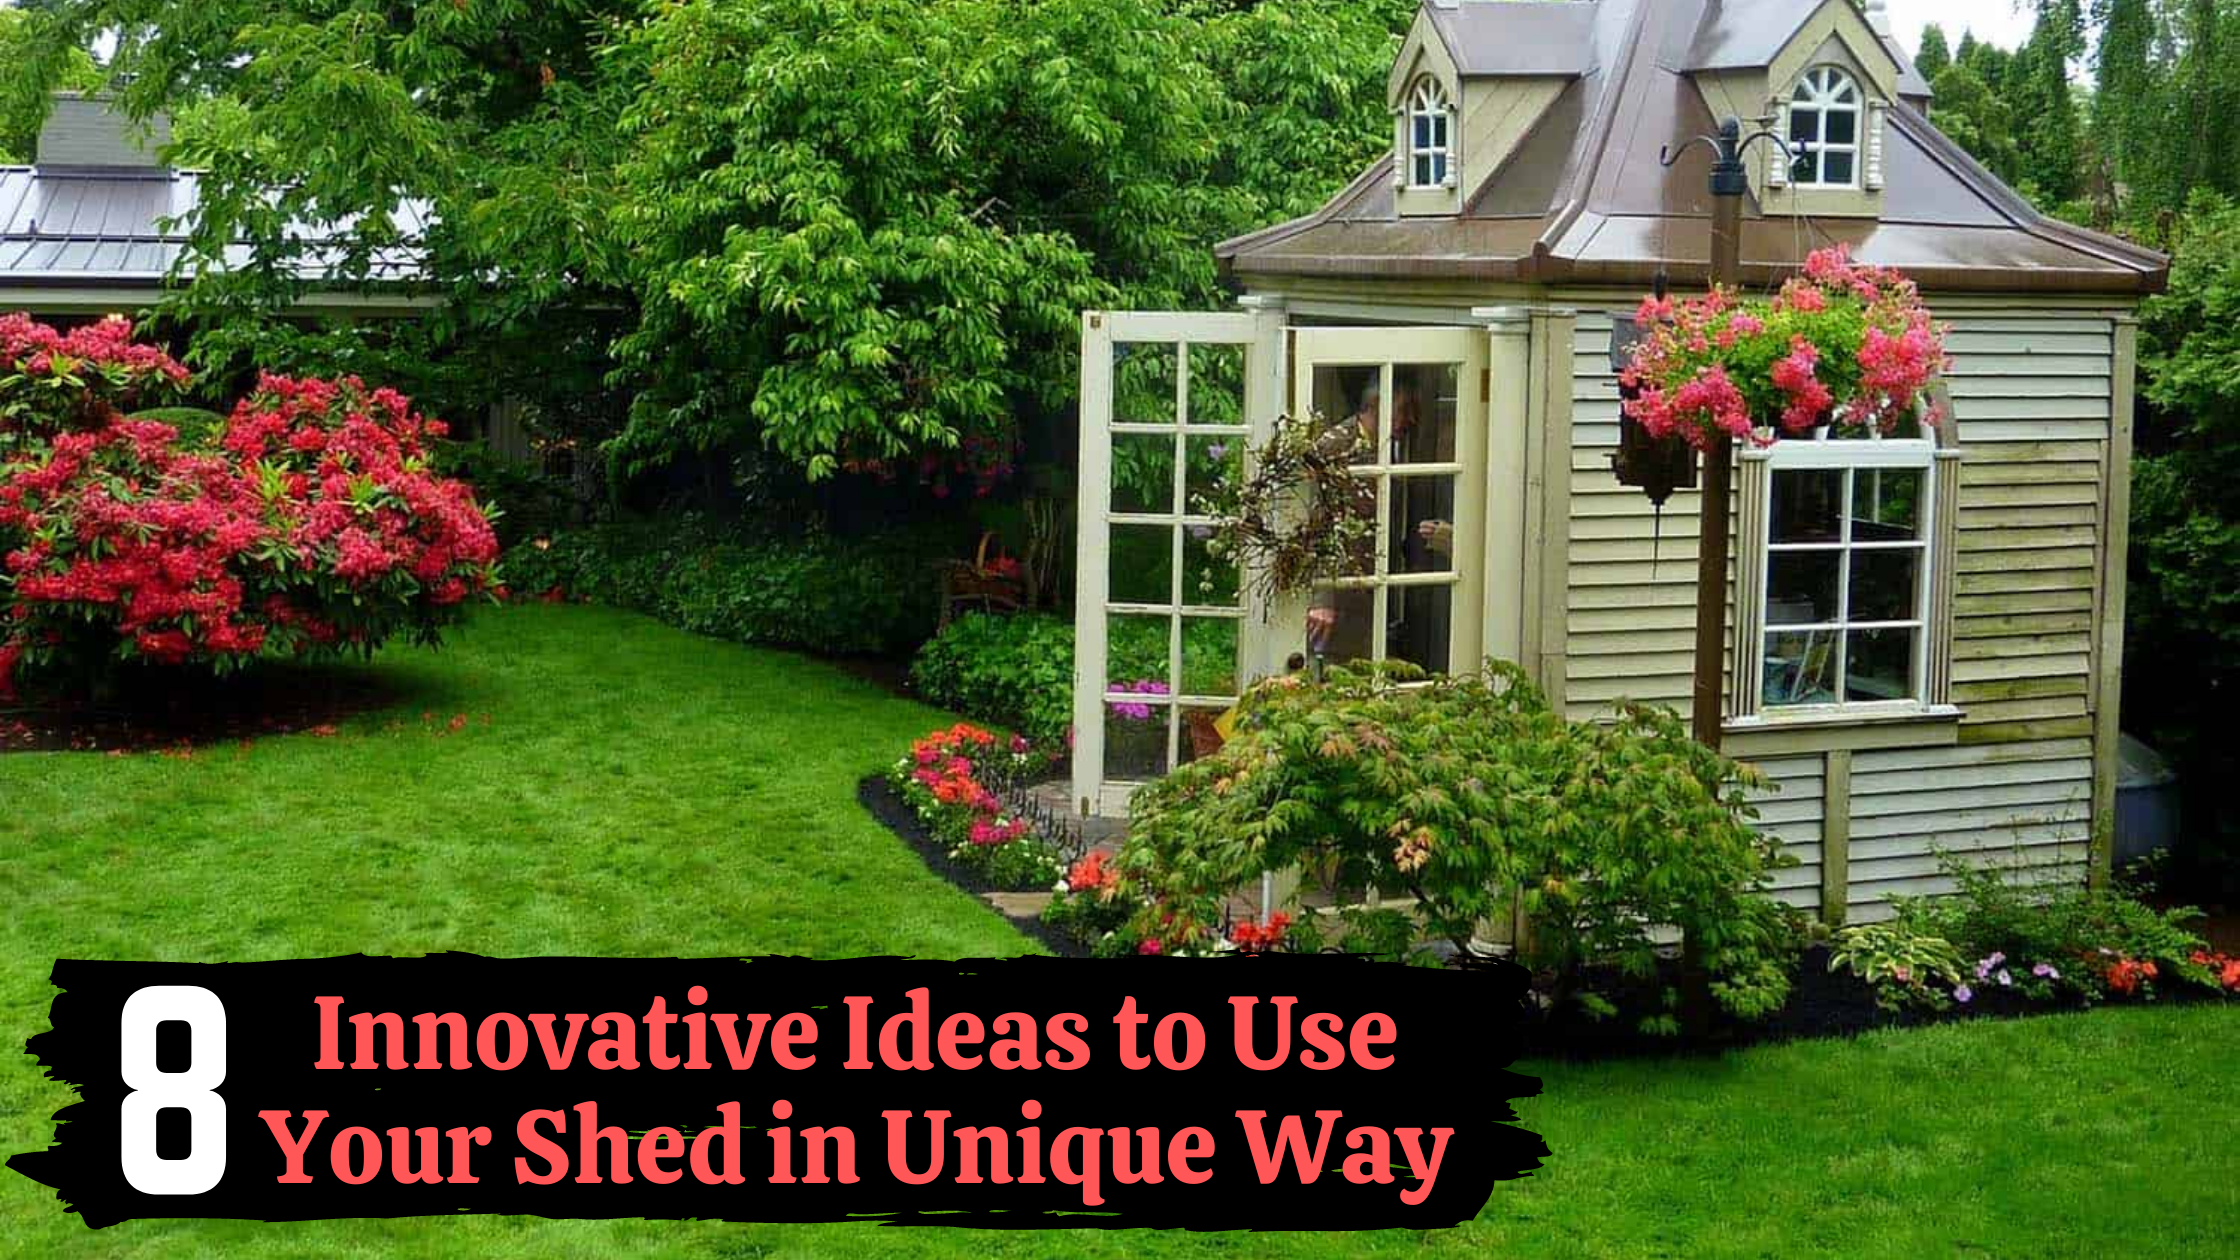 8 Innovative Ideas to Use Your Shed in Unique Way